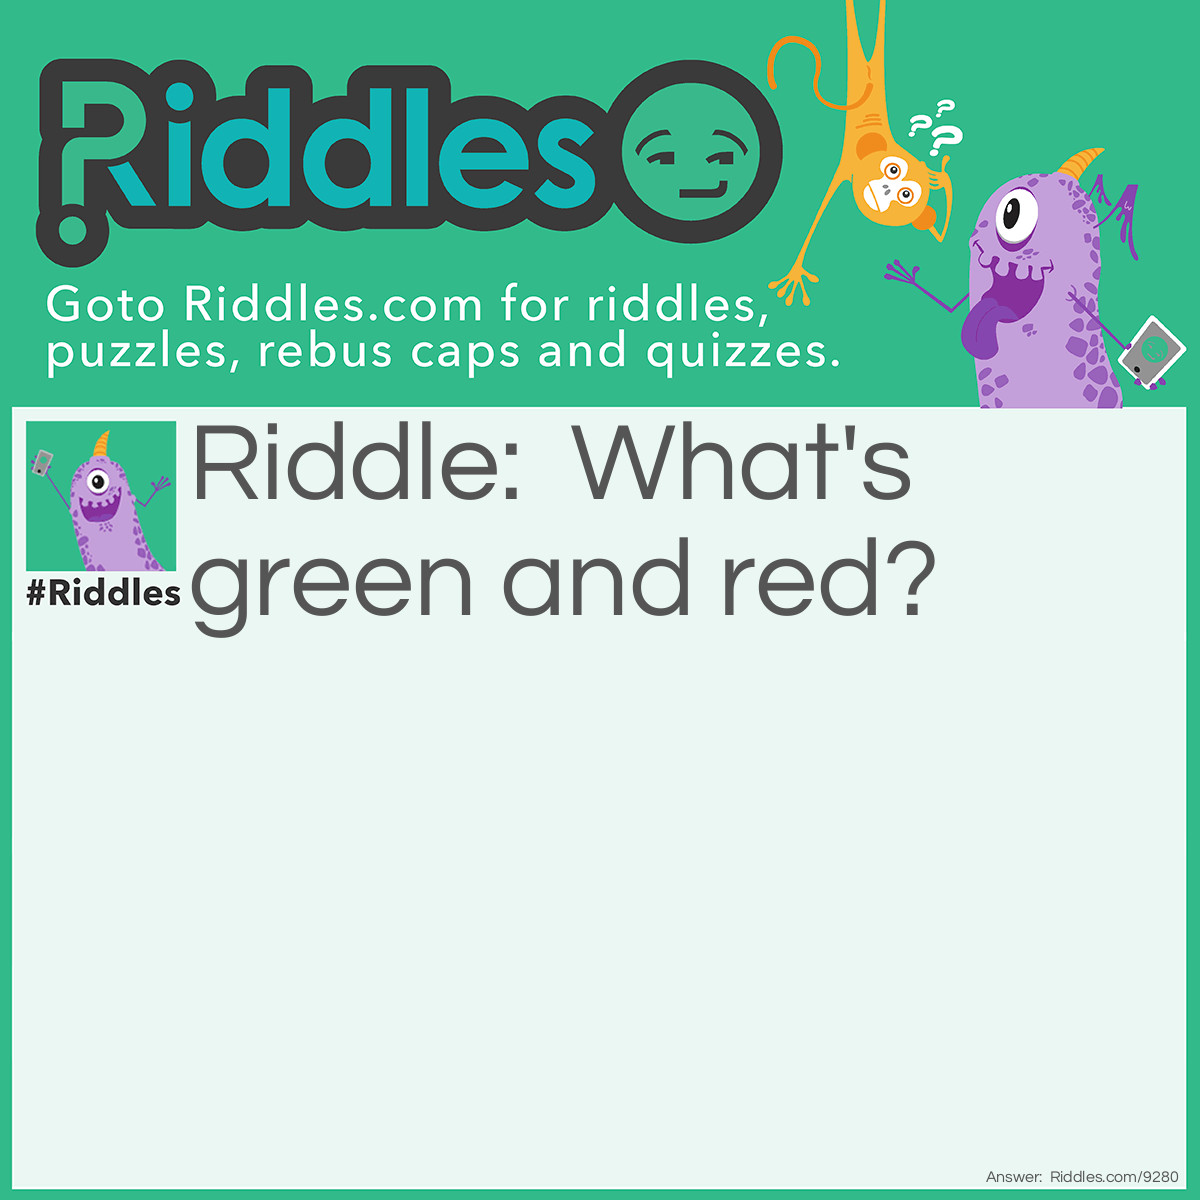 Riddle: What's green and red? Answer: Frogs in a blender.